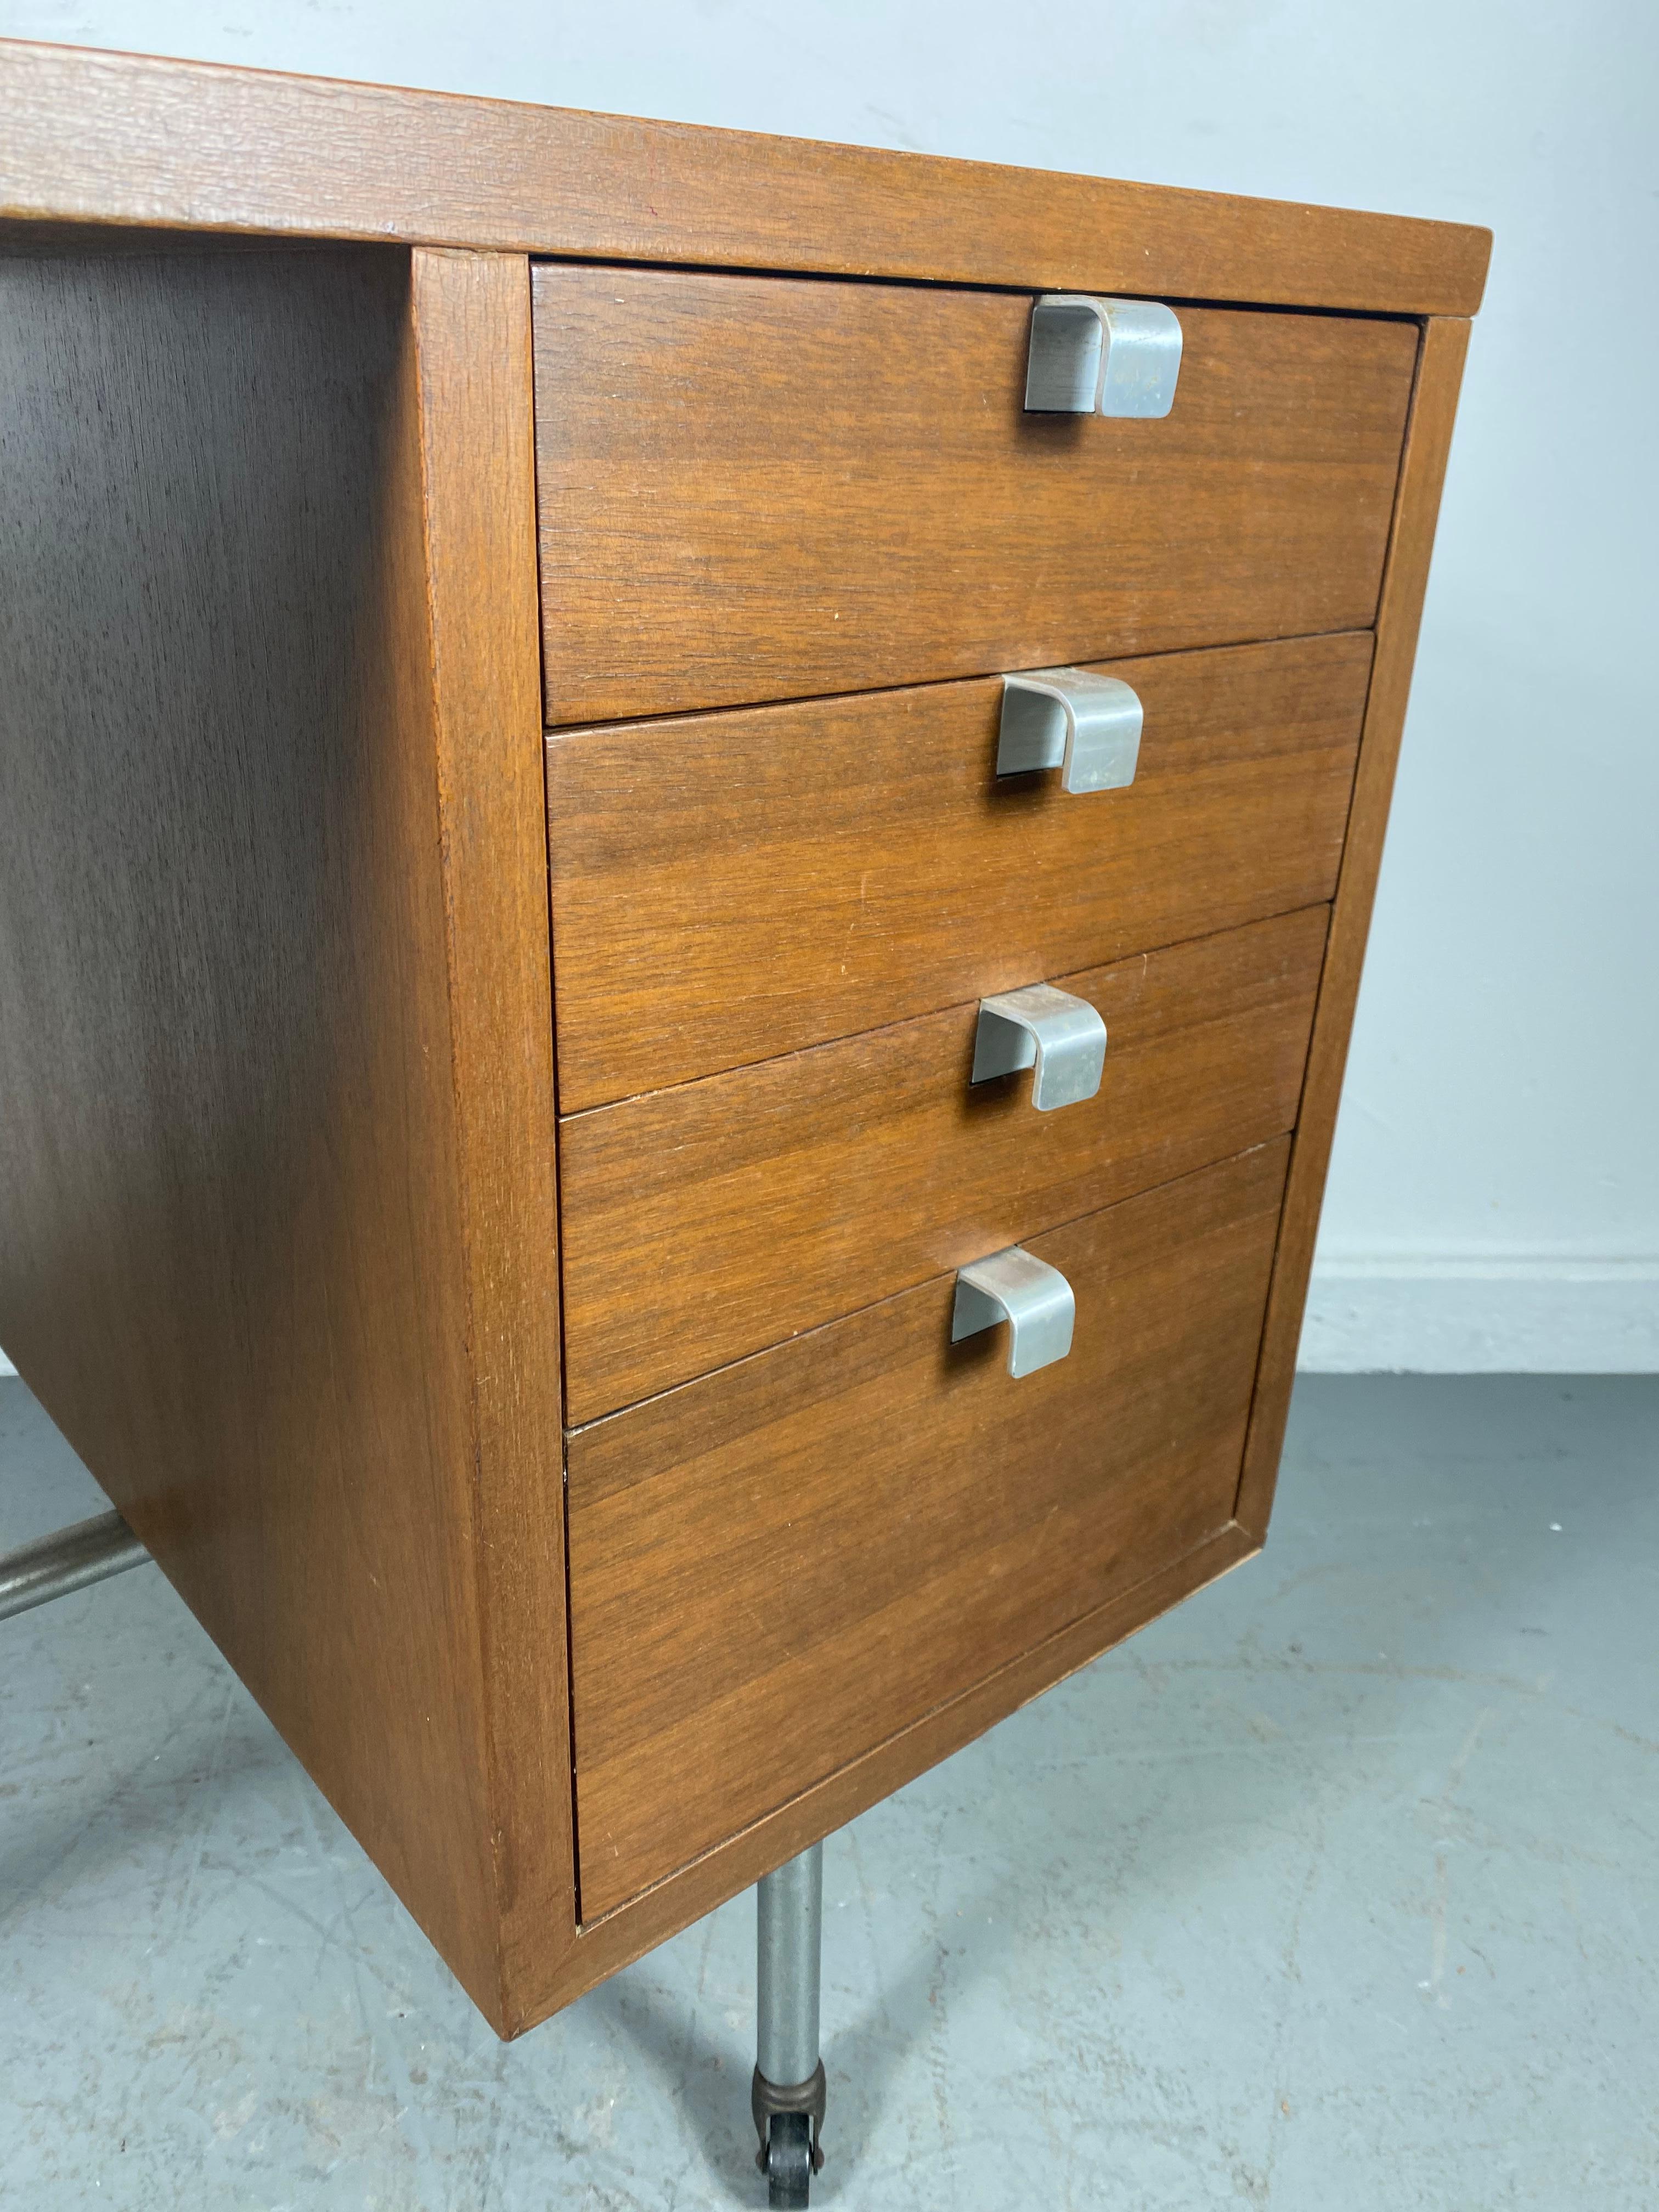 Early George Nelson Desk / Return, Child's Desk, Modernist, Herman Miller In Good Condition For Sale In Buffalo, NY